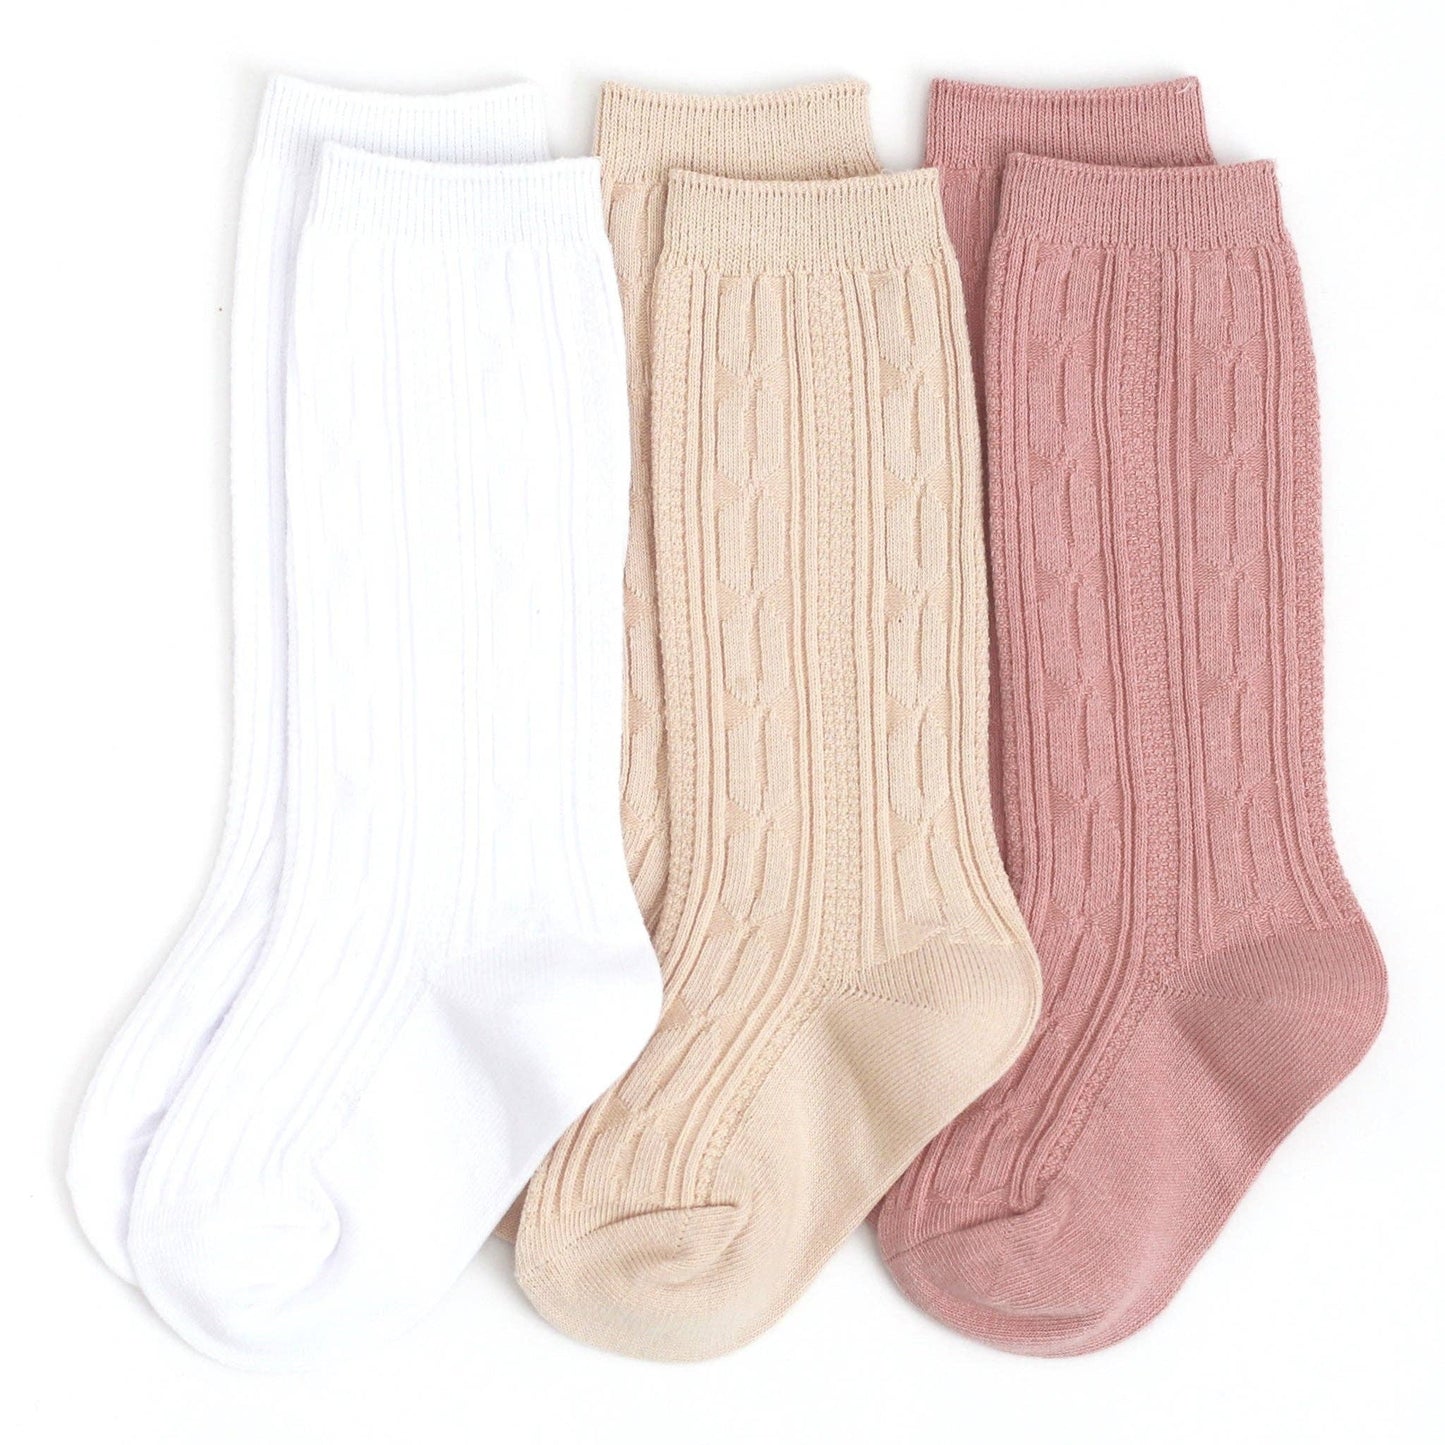 Girlhood Cable Knit Knee High Sock 3-Pack: 1.5-3 YEARS